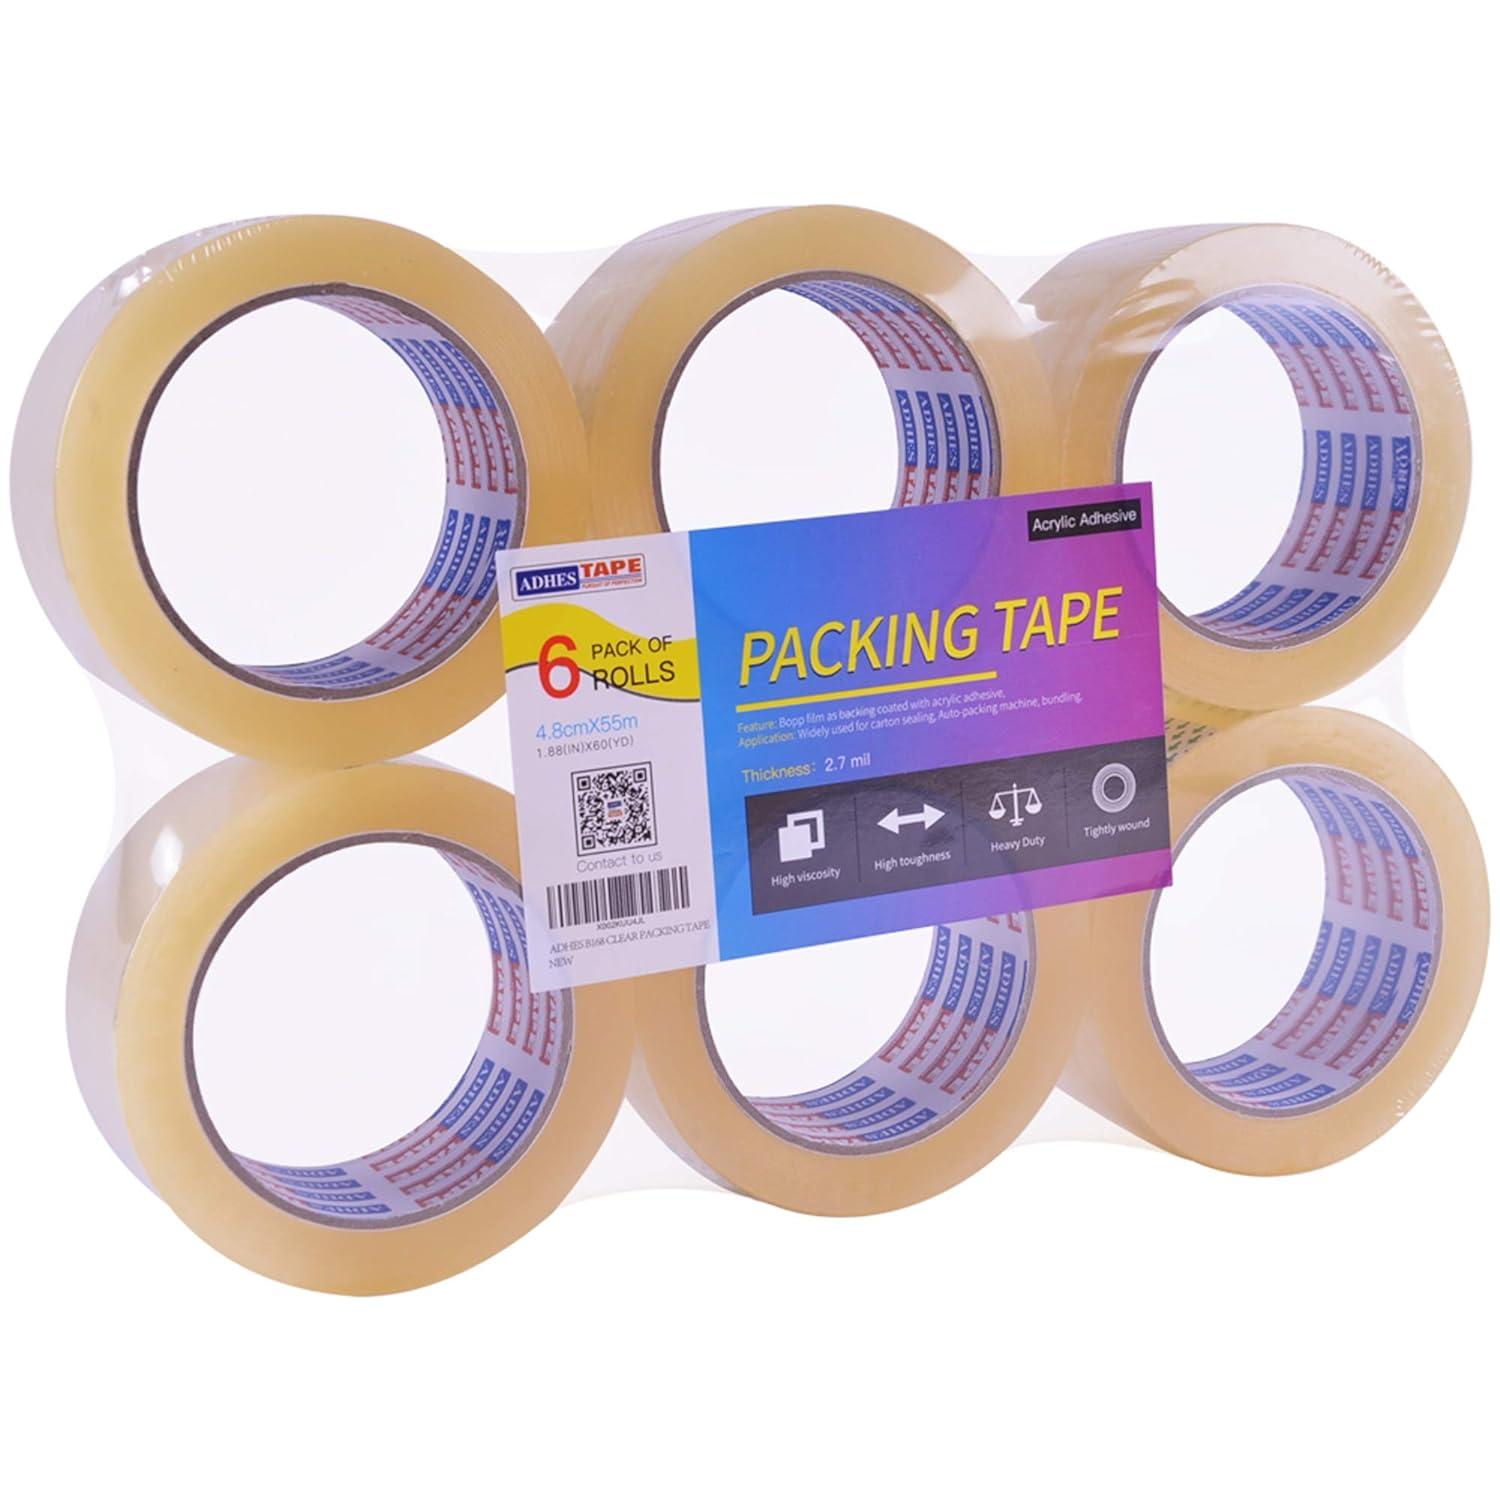 adhes shipping tape packaging tape packing tape for moving boxes 60yard per roll 1 88inch width 2 7mil